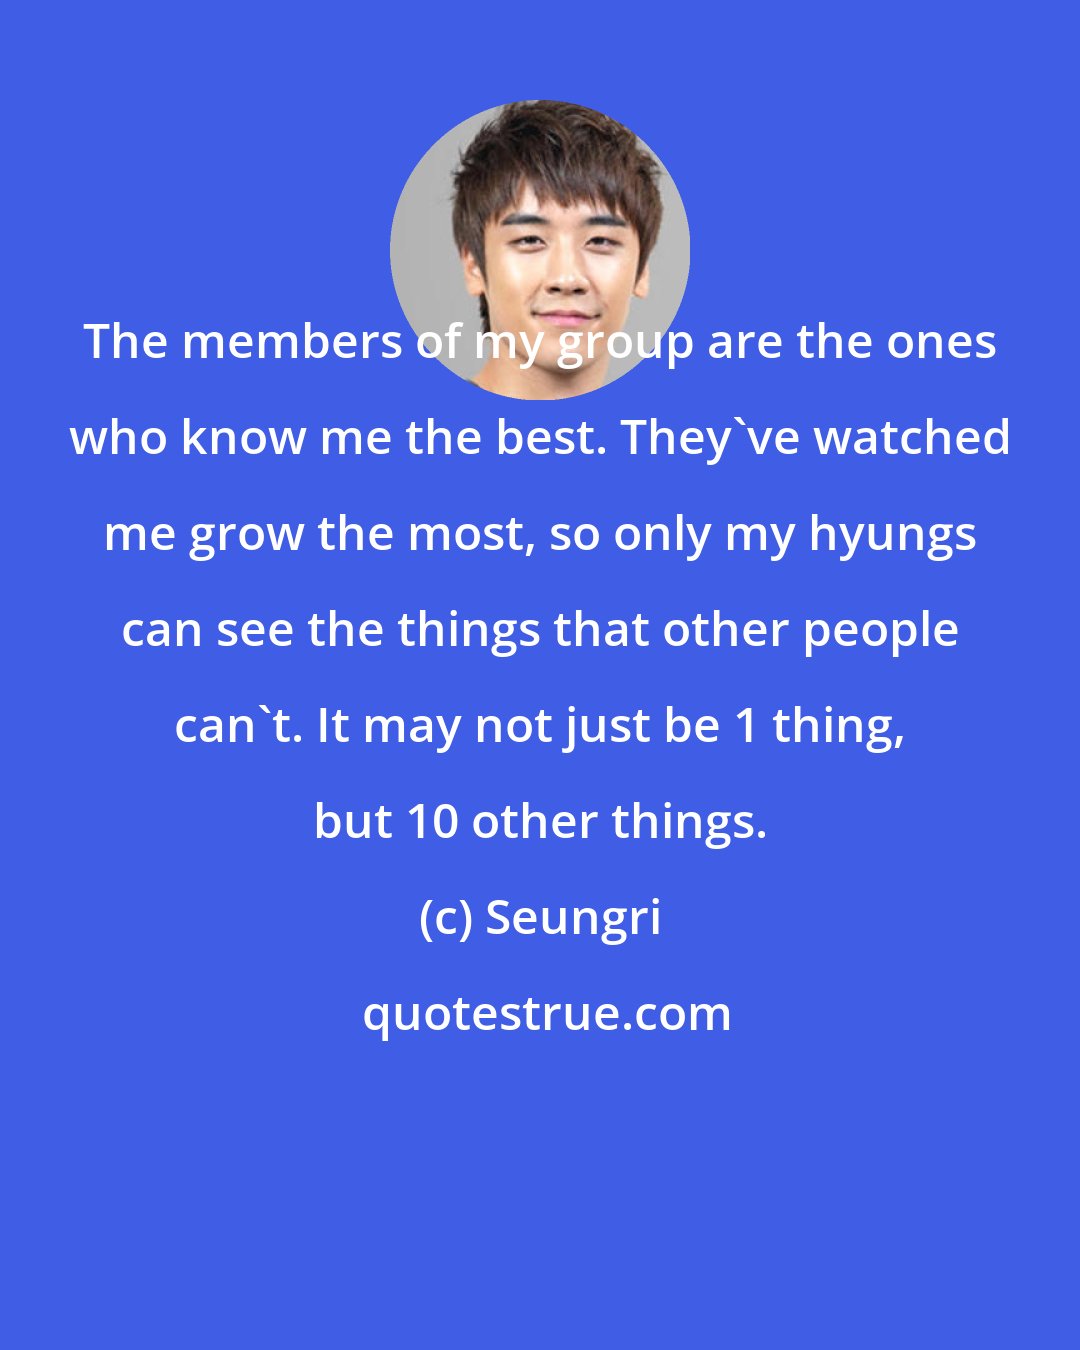 Seungri: The members of my group are the ones who know me the best. They've watched me grow the most, so only my hyungs can see the things that other people can't. It may not just be 1 thing, but 10 other things.